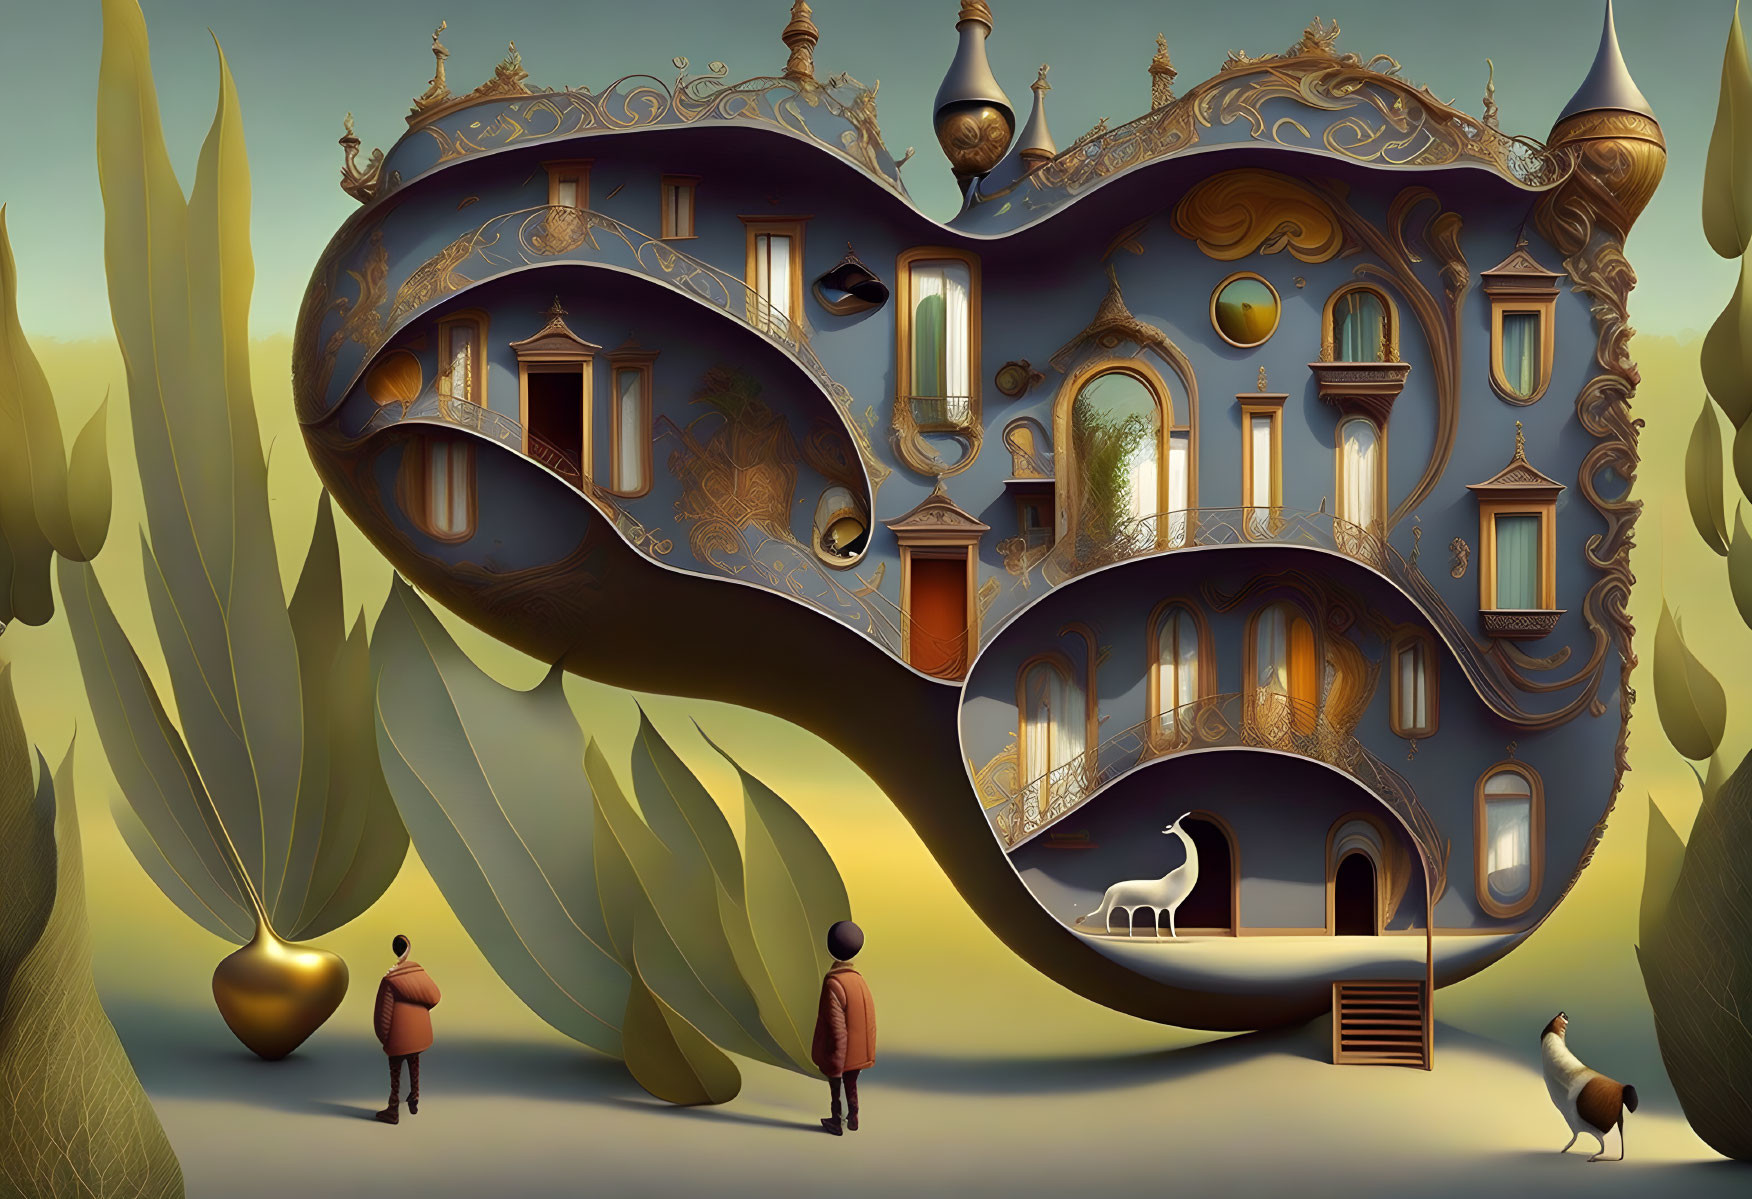 Surreal illustration of infinity-shaped building with ornate architecture, stylized figures, peacock,